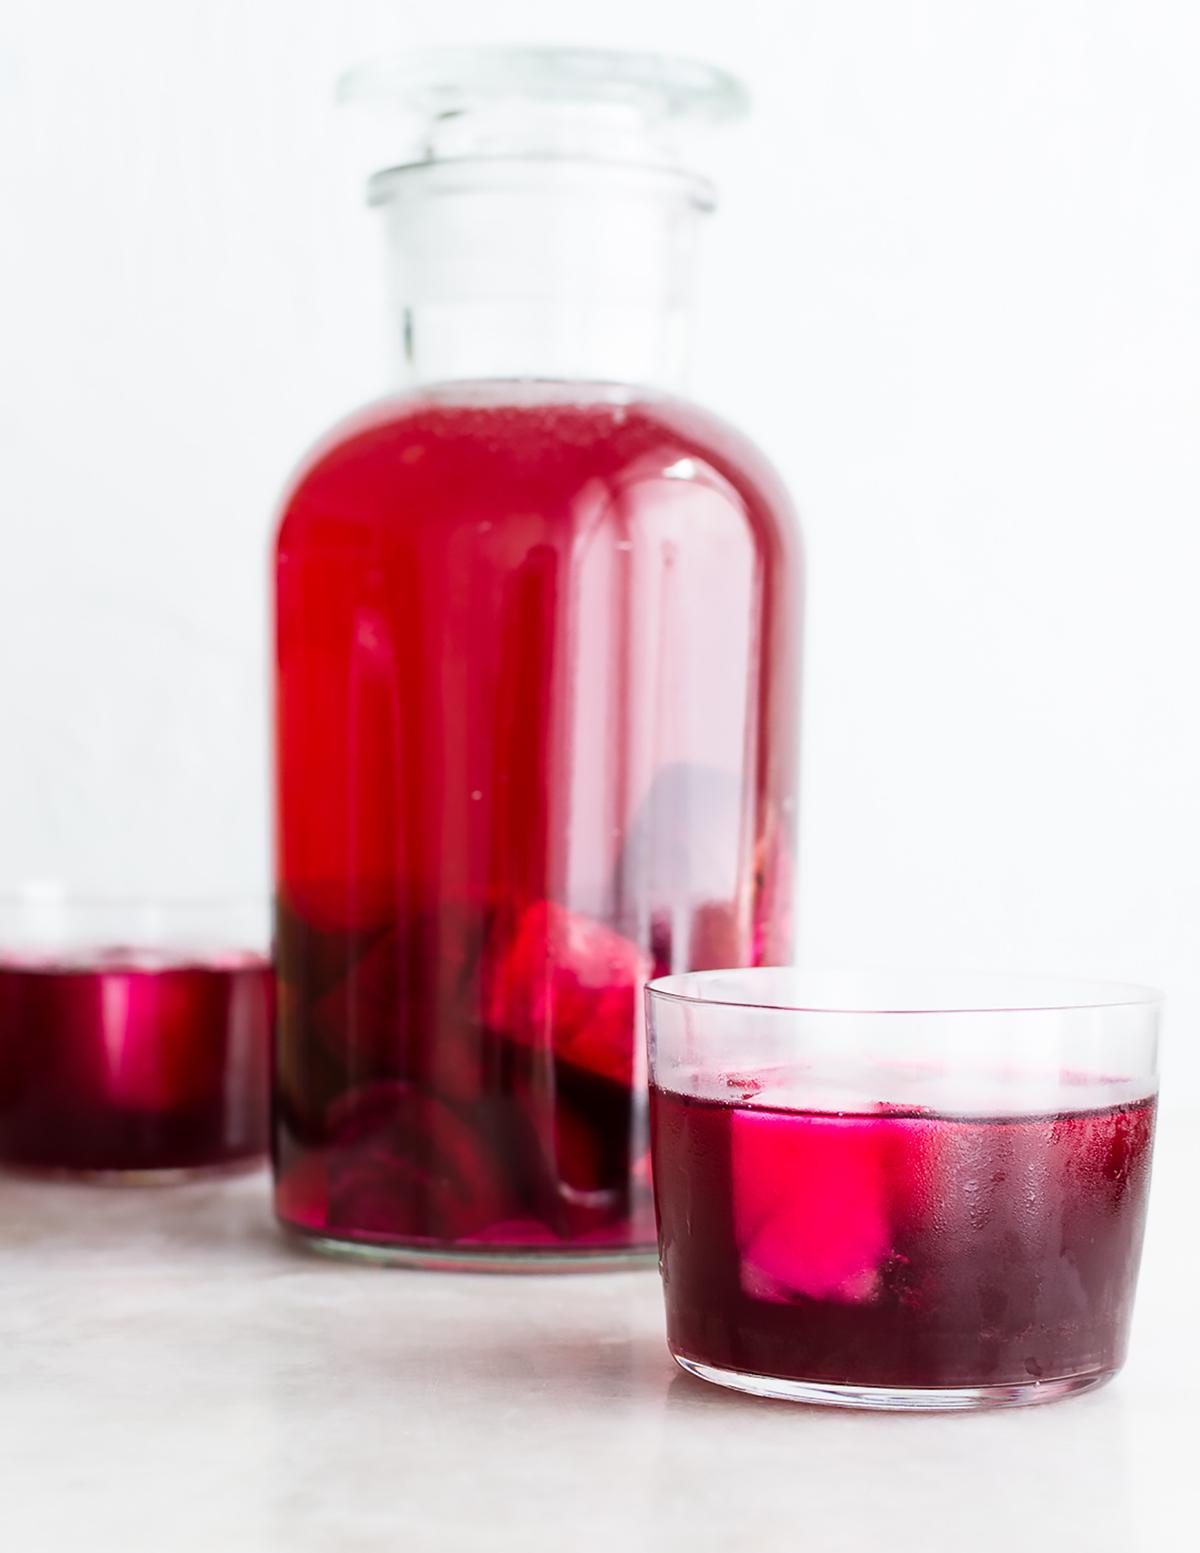 Beet kvass is especially popular in the United States. (Jennifer McGruther)